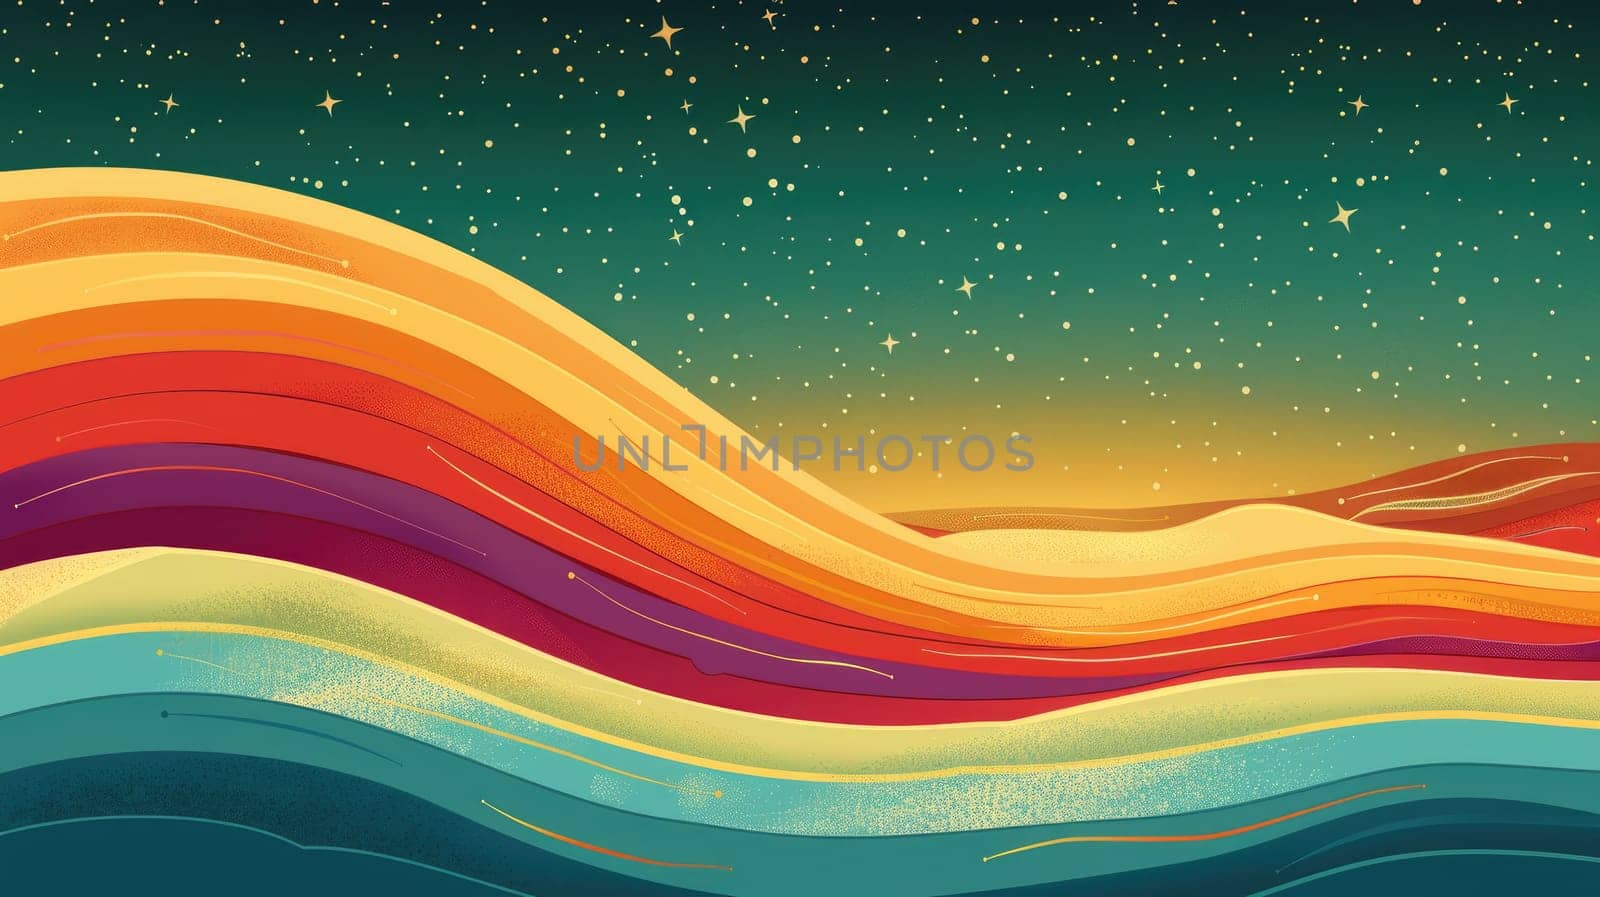 A poster with a bold, illustrated rainbow wave flowing across the bottom half, with the top half featuring a serene sky and subtle stars, creating a peaceful and celebratory pride background.